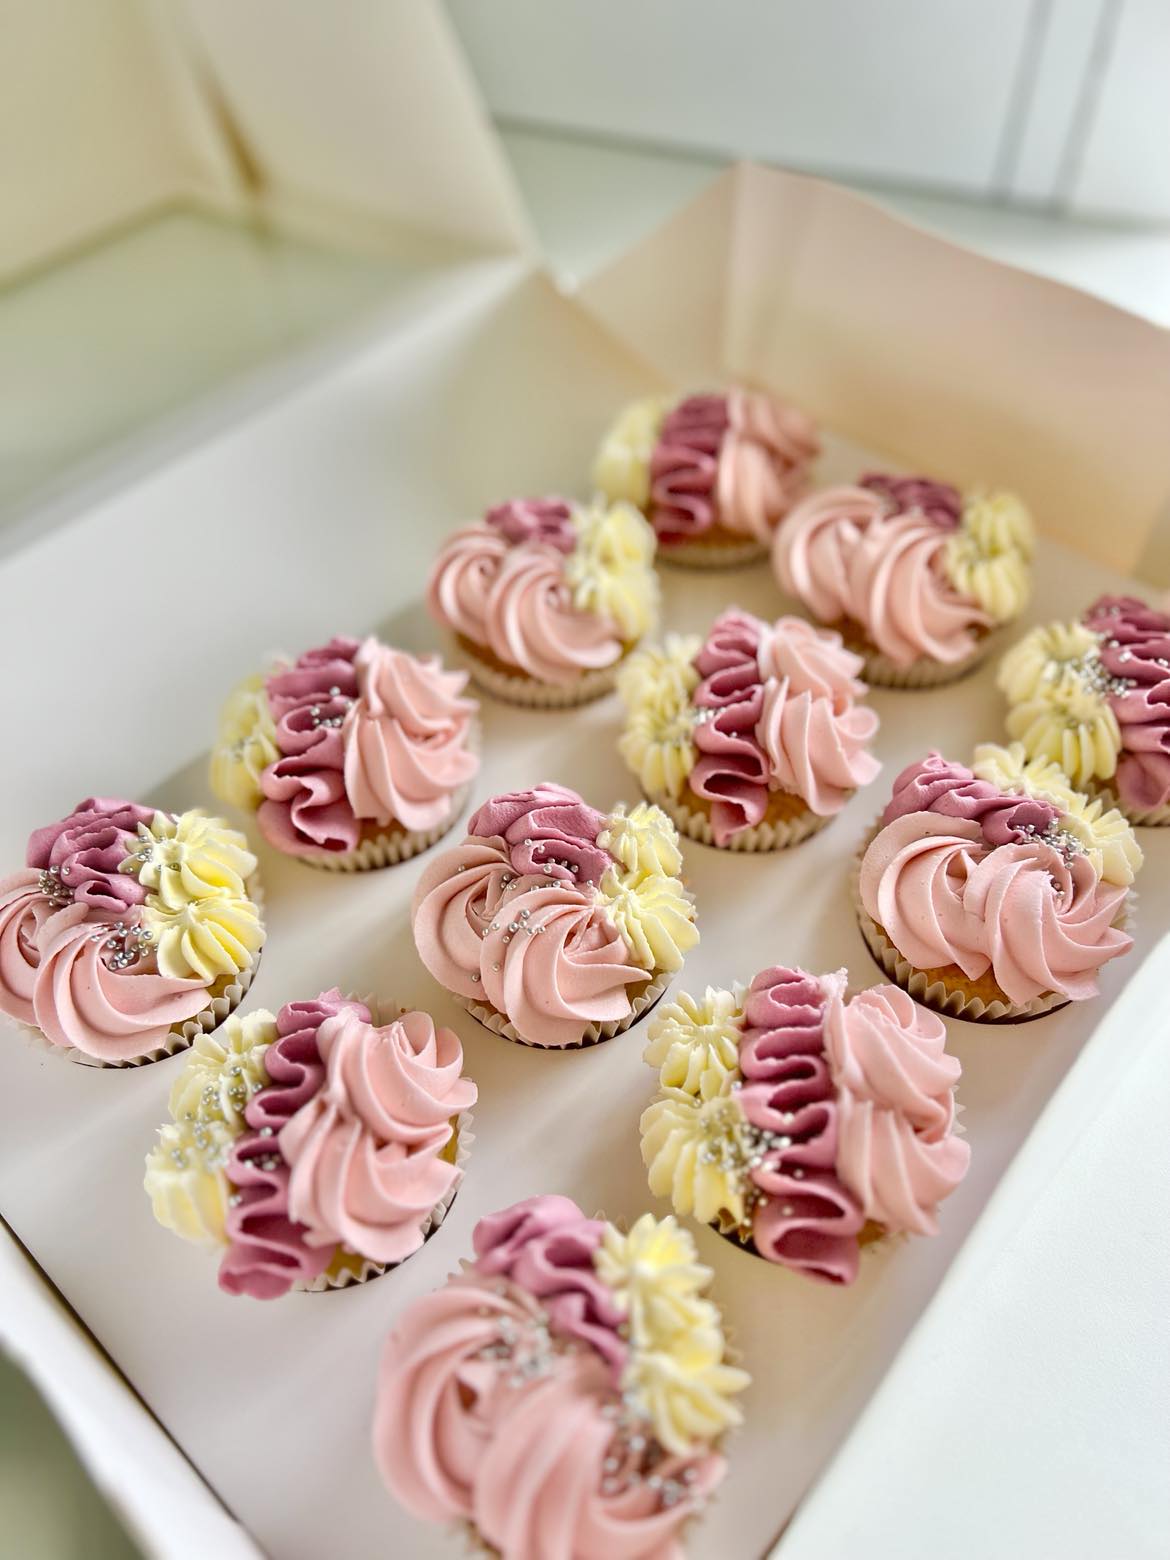 Buttercream and bubbles - Saturday 4th May, 1-2:30pm